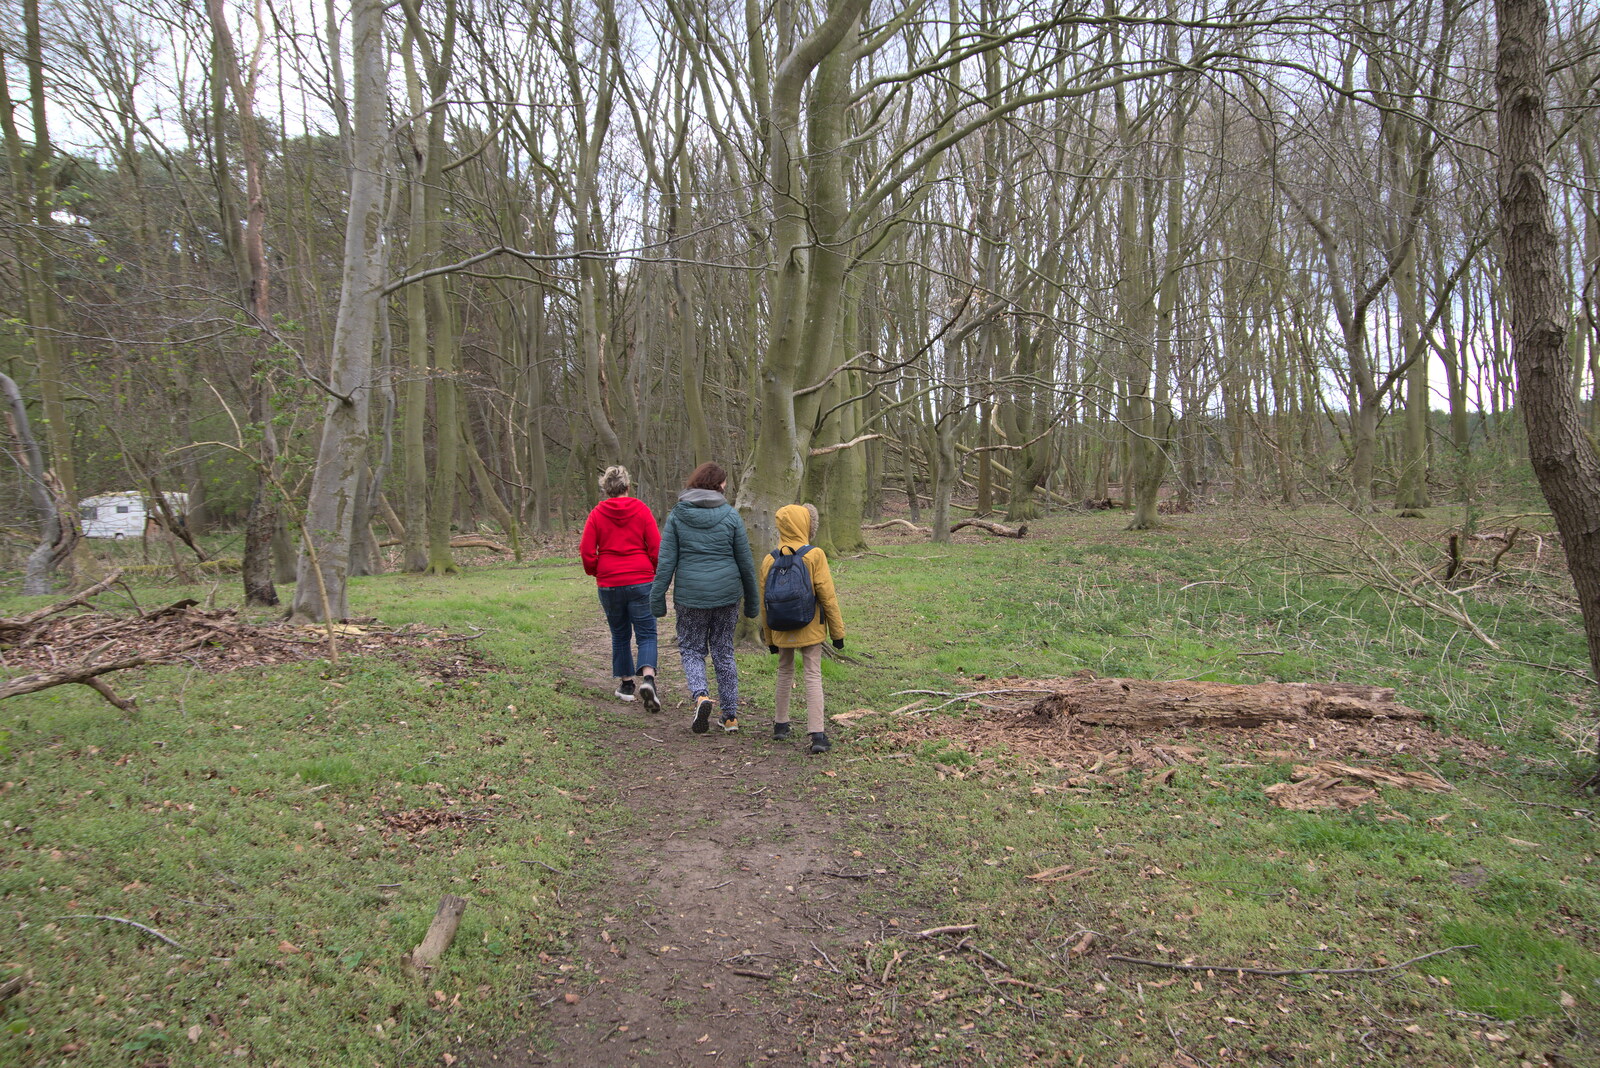 A Camper-Van Trip, West Harling, Norfolk - 13th April 2022: Jules, Isobel and Harry are in the woods